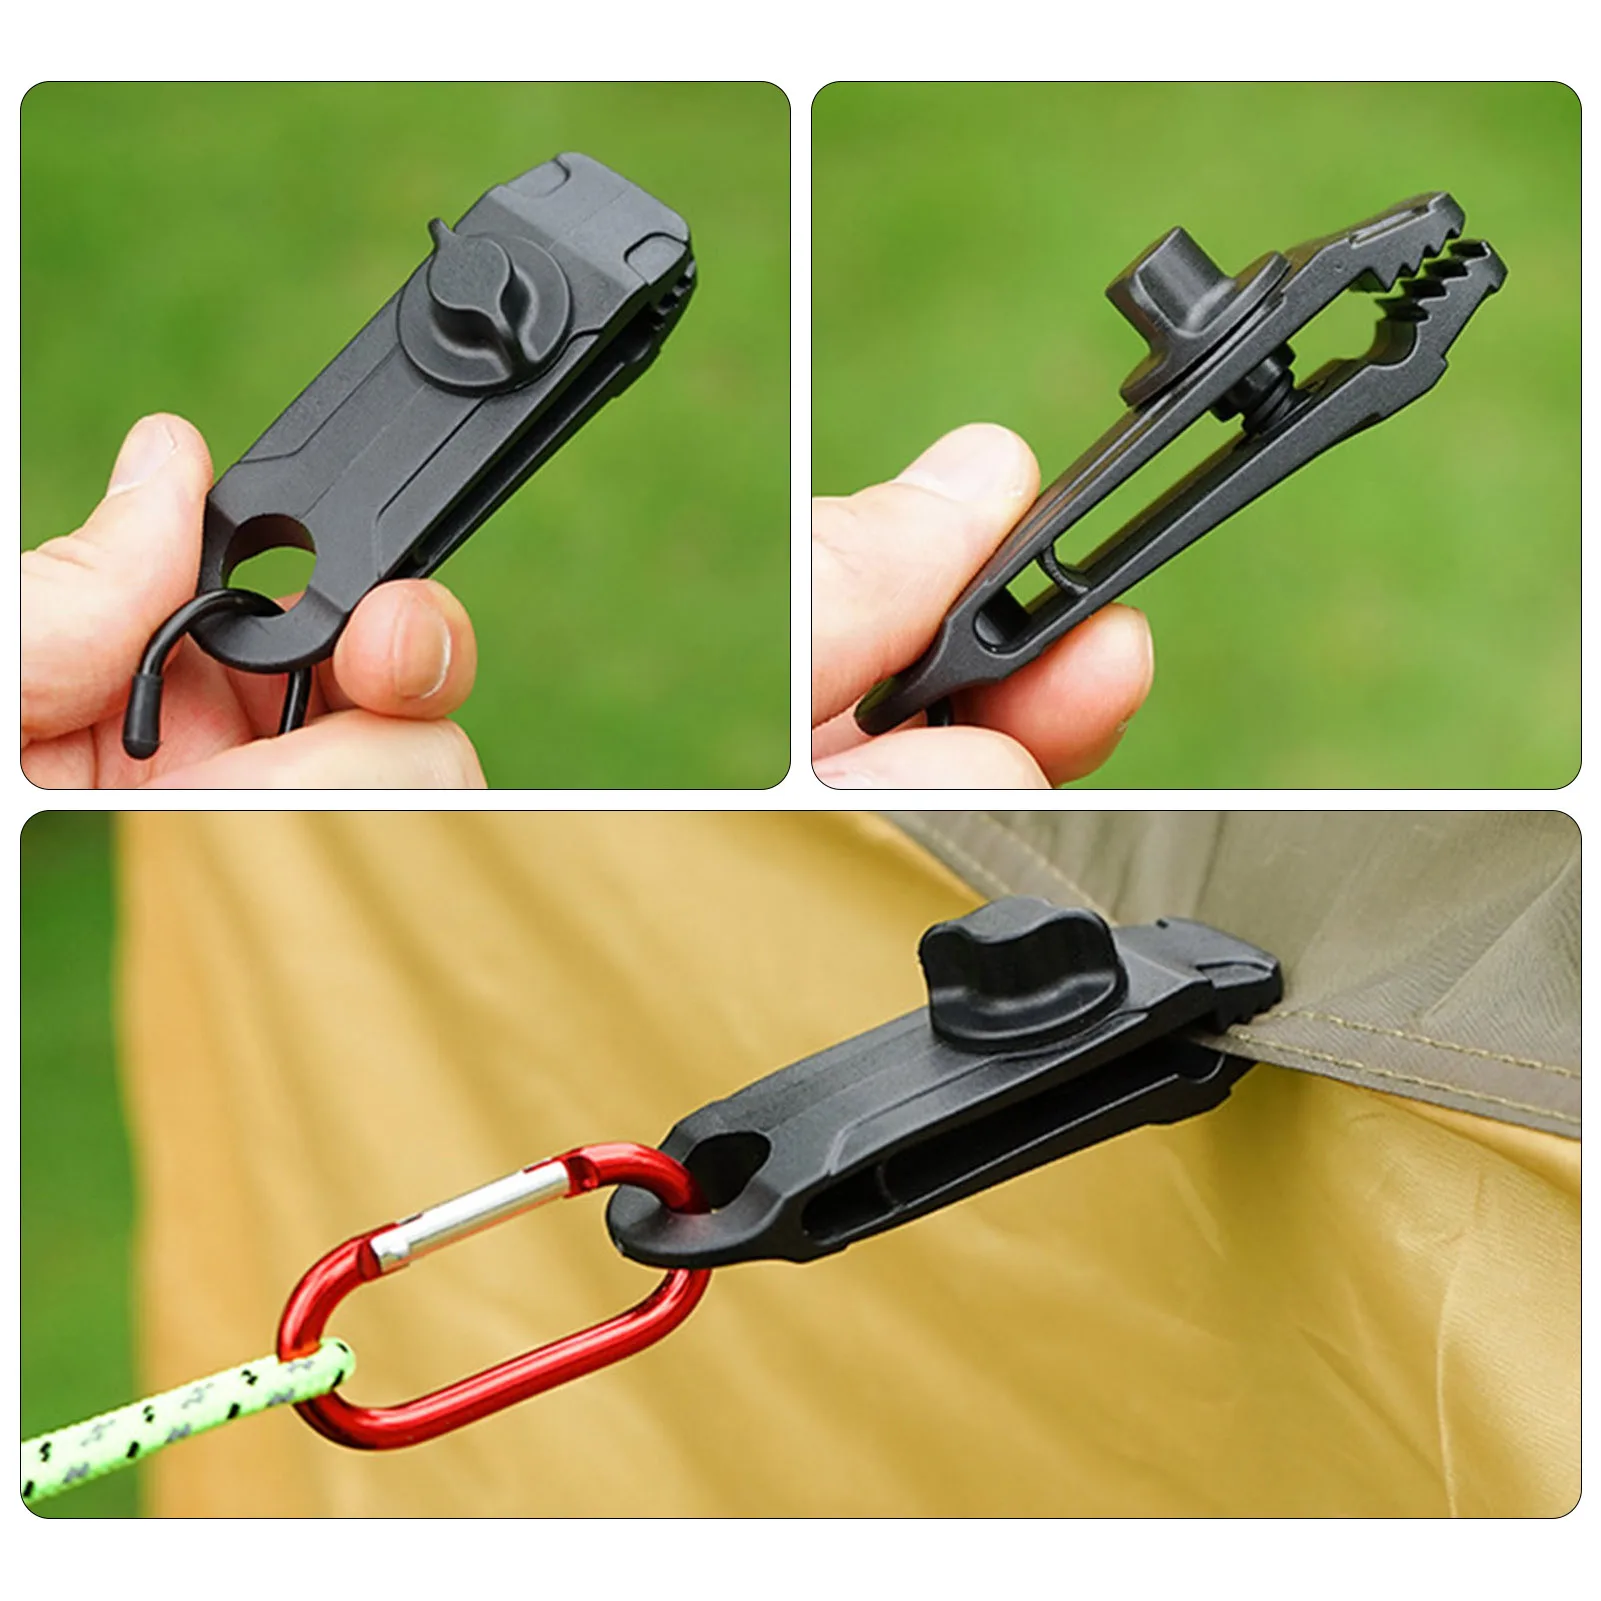 

Tents Tarp Clips Awning Wind Rope Clamp | Awnings Plastics Clip Camping Windproof Tent Crocodile Clip | Outdoor Camping Clips Ho